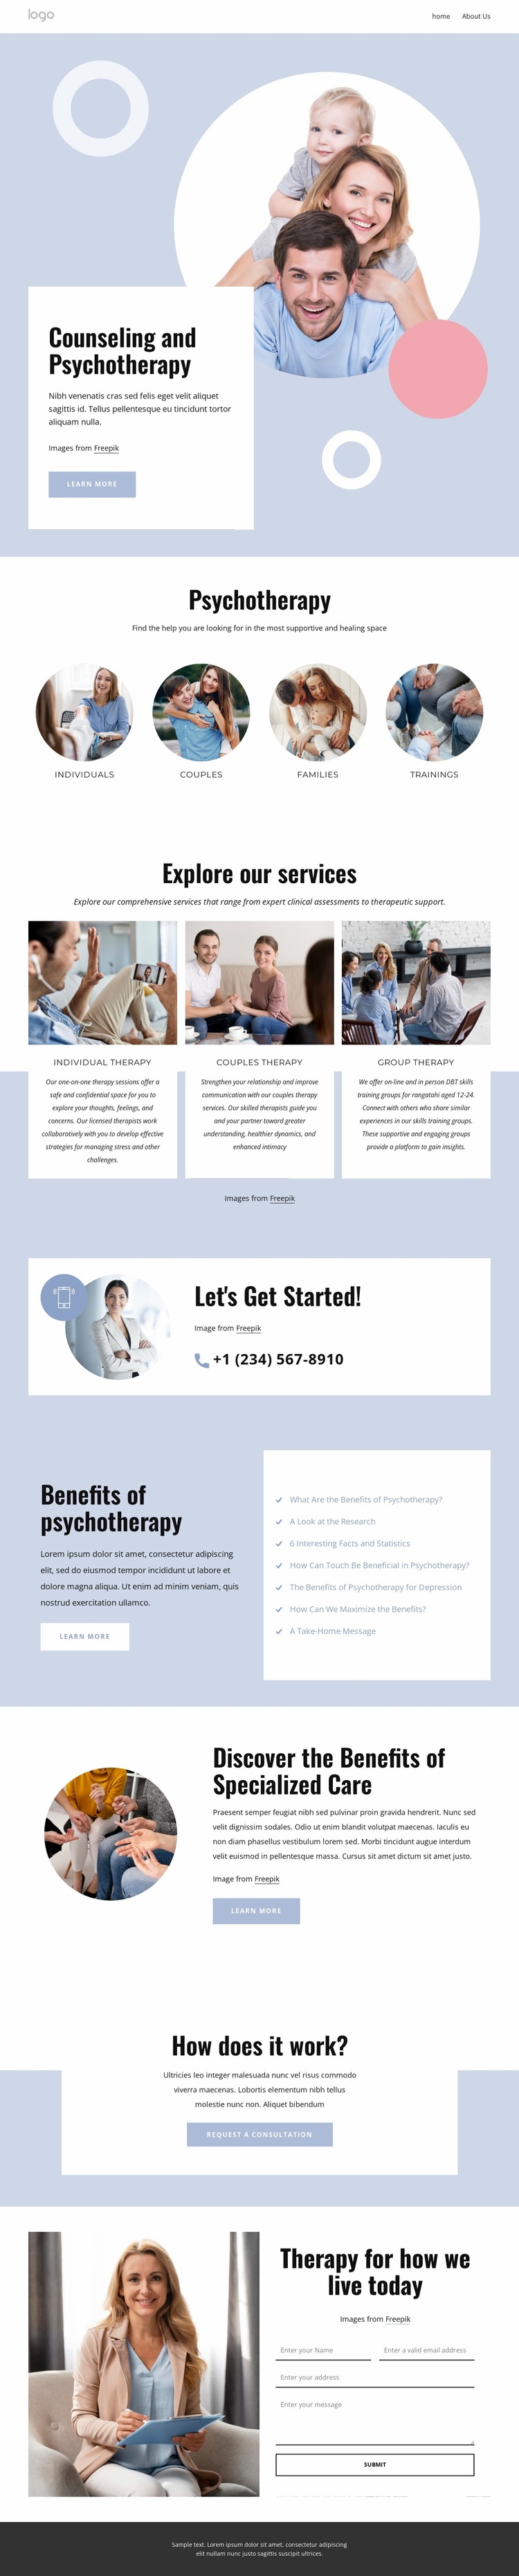 Counseling and psychotherapy Website Design